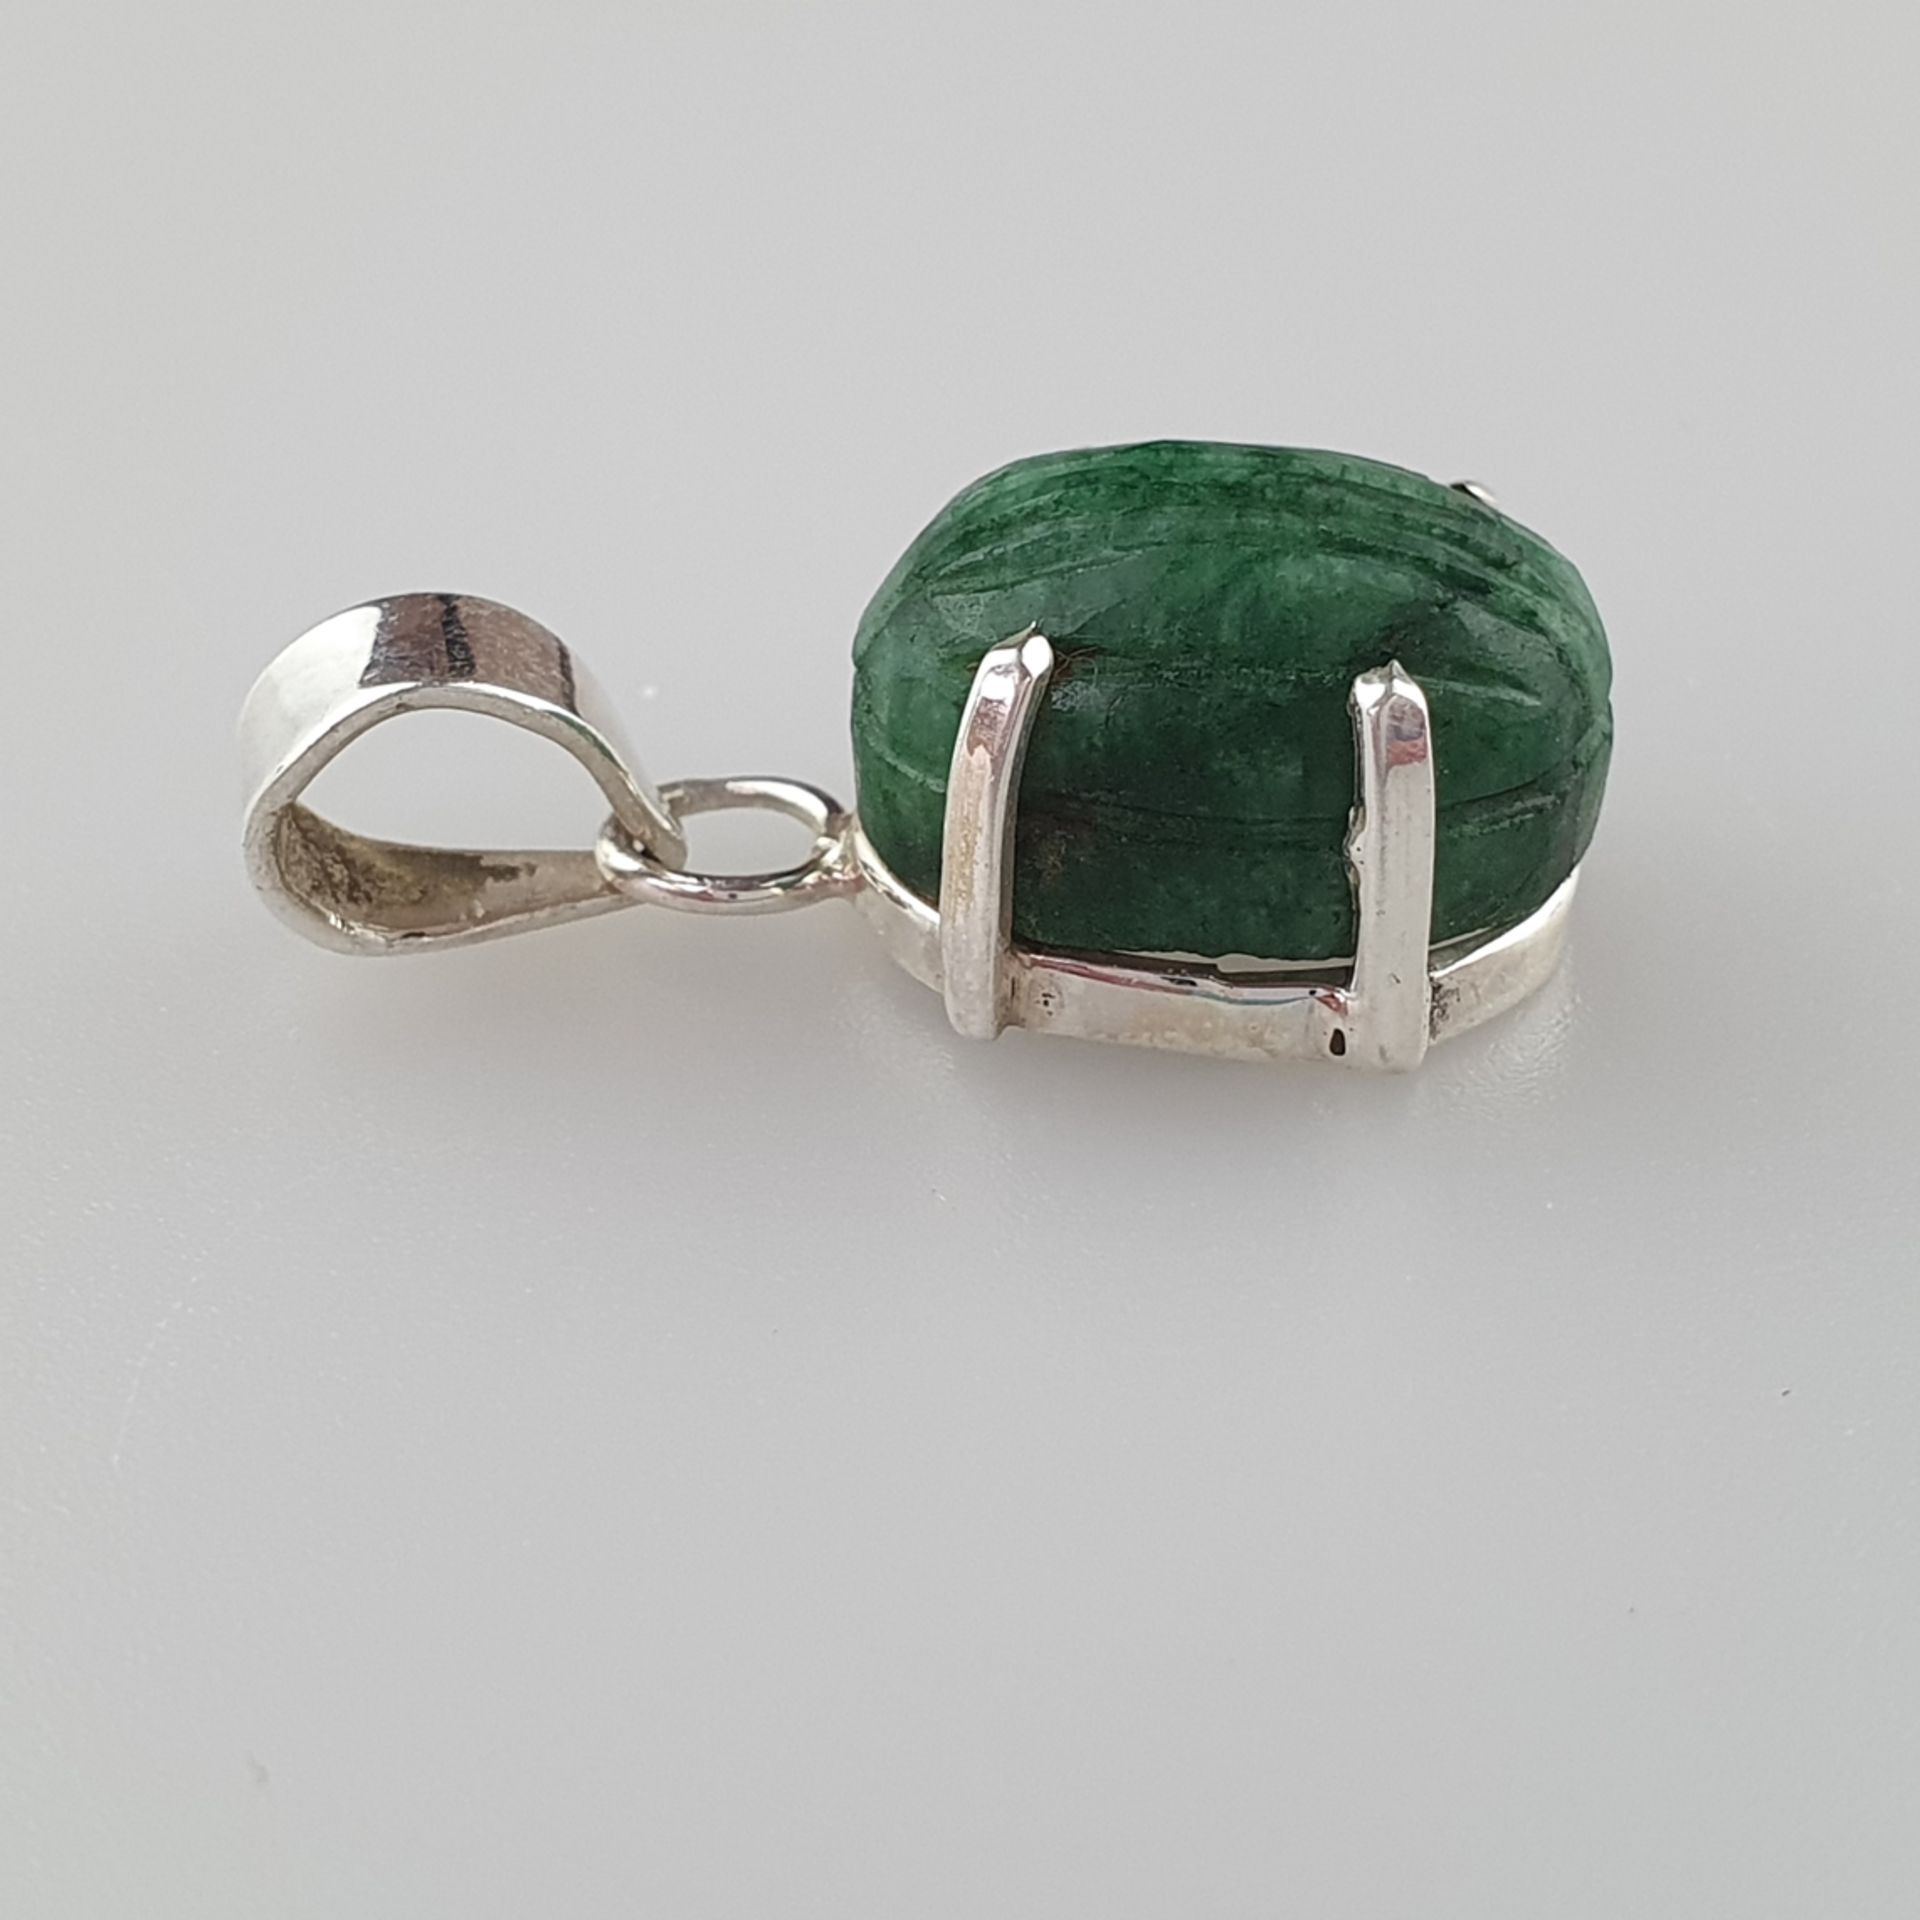 925 Silver Pendant with a Carved Emerald of 14ct, ca. 5,0g, total measurements: ca. 22 x 12,5 mm - Image 3 of 4